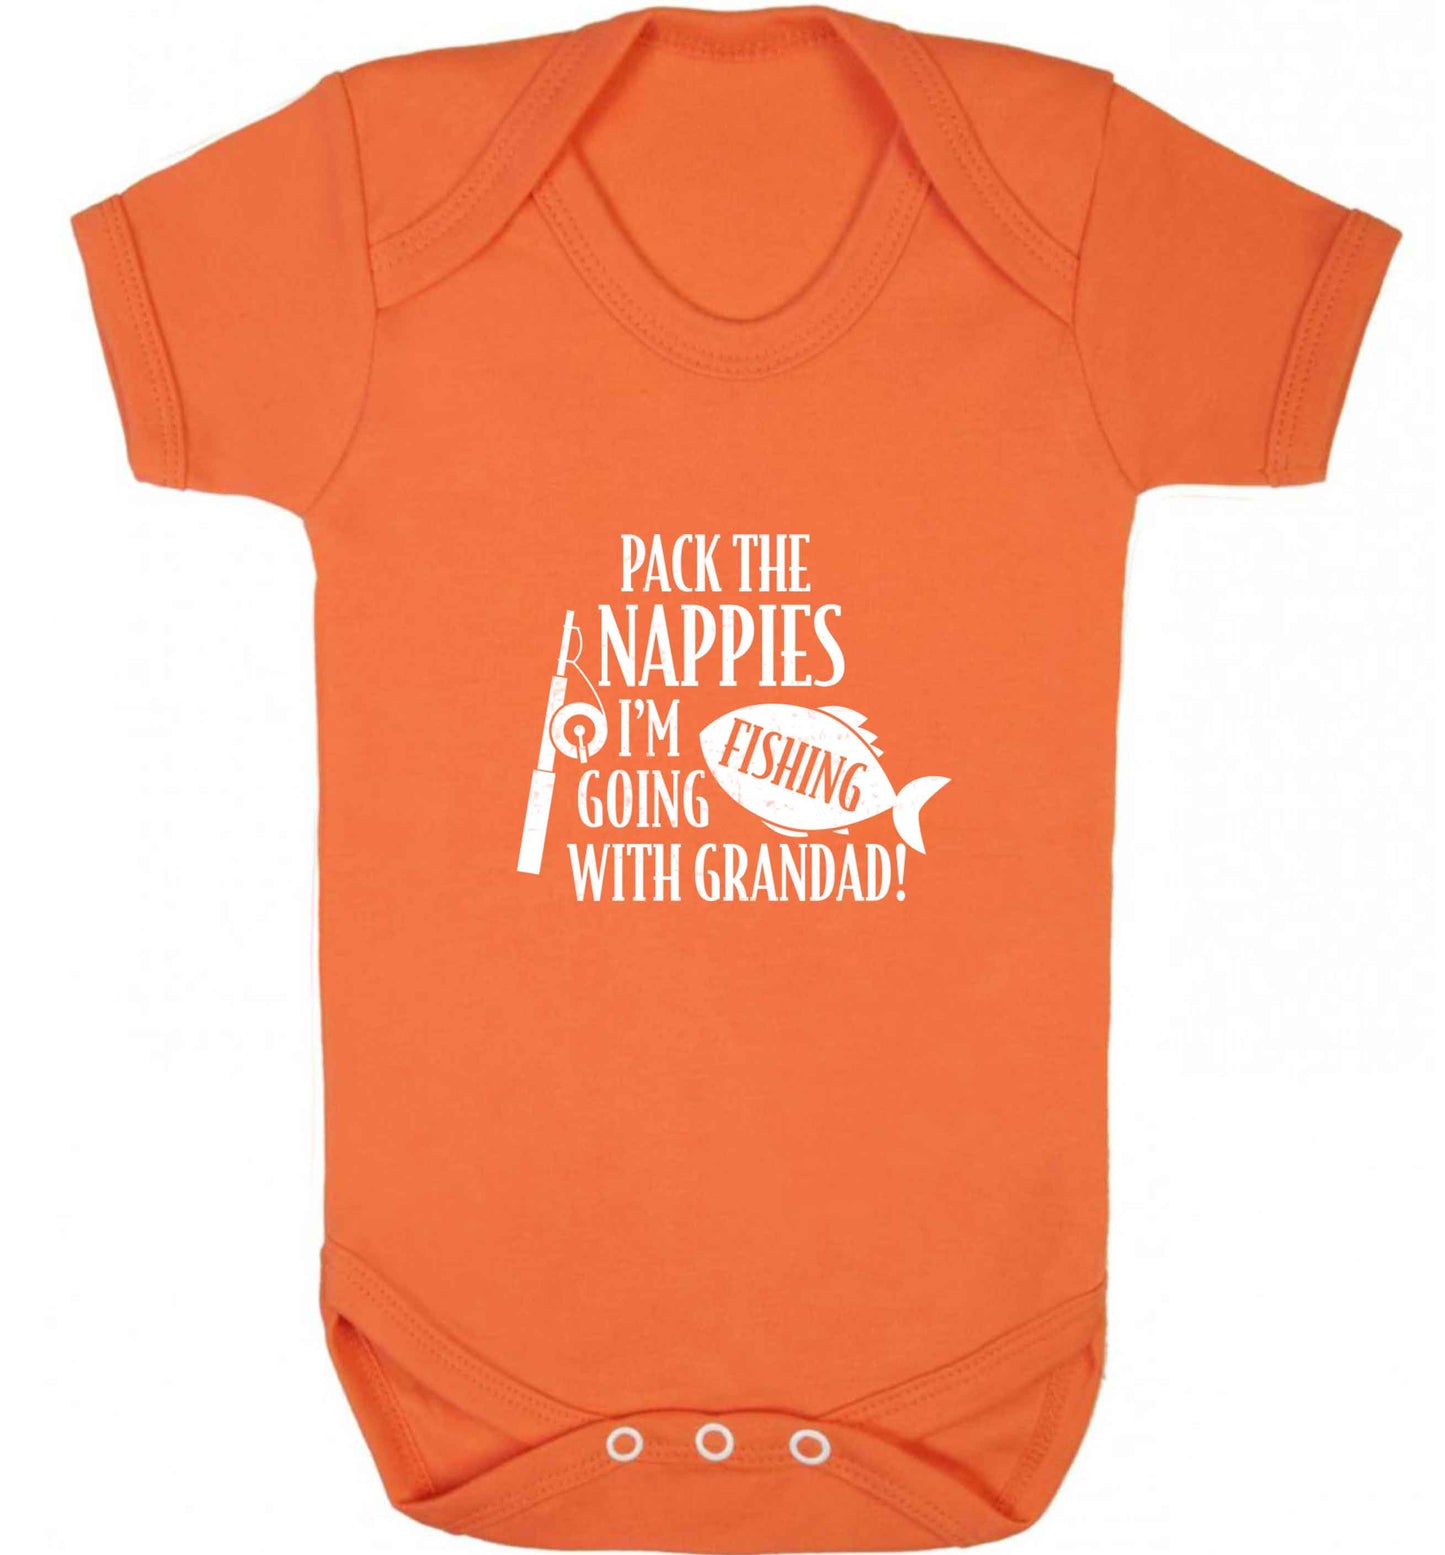 Pack the nappies I'm going fishing with Grandad baby vest orange 18-24 months